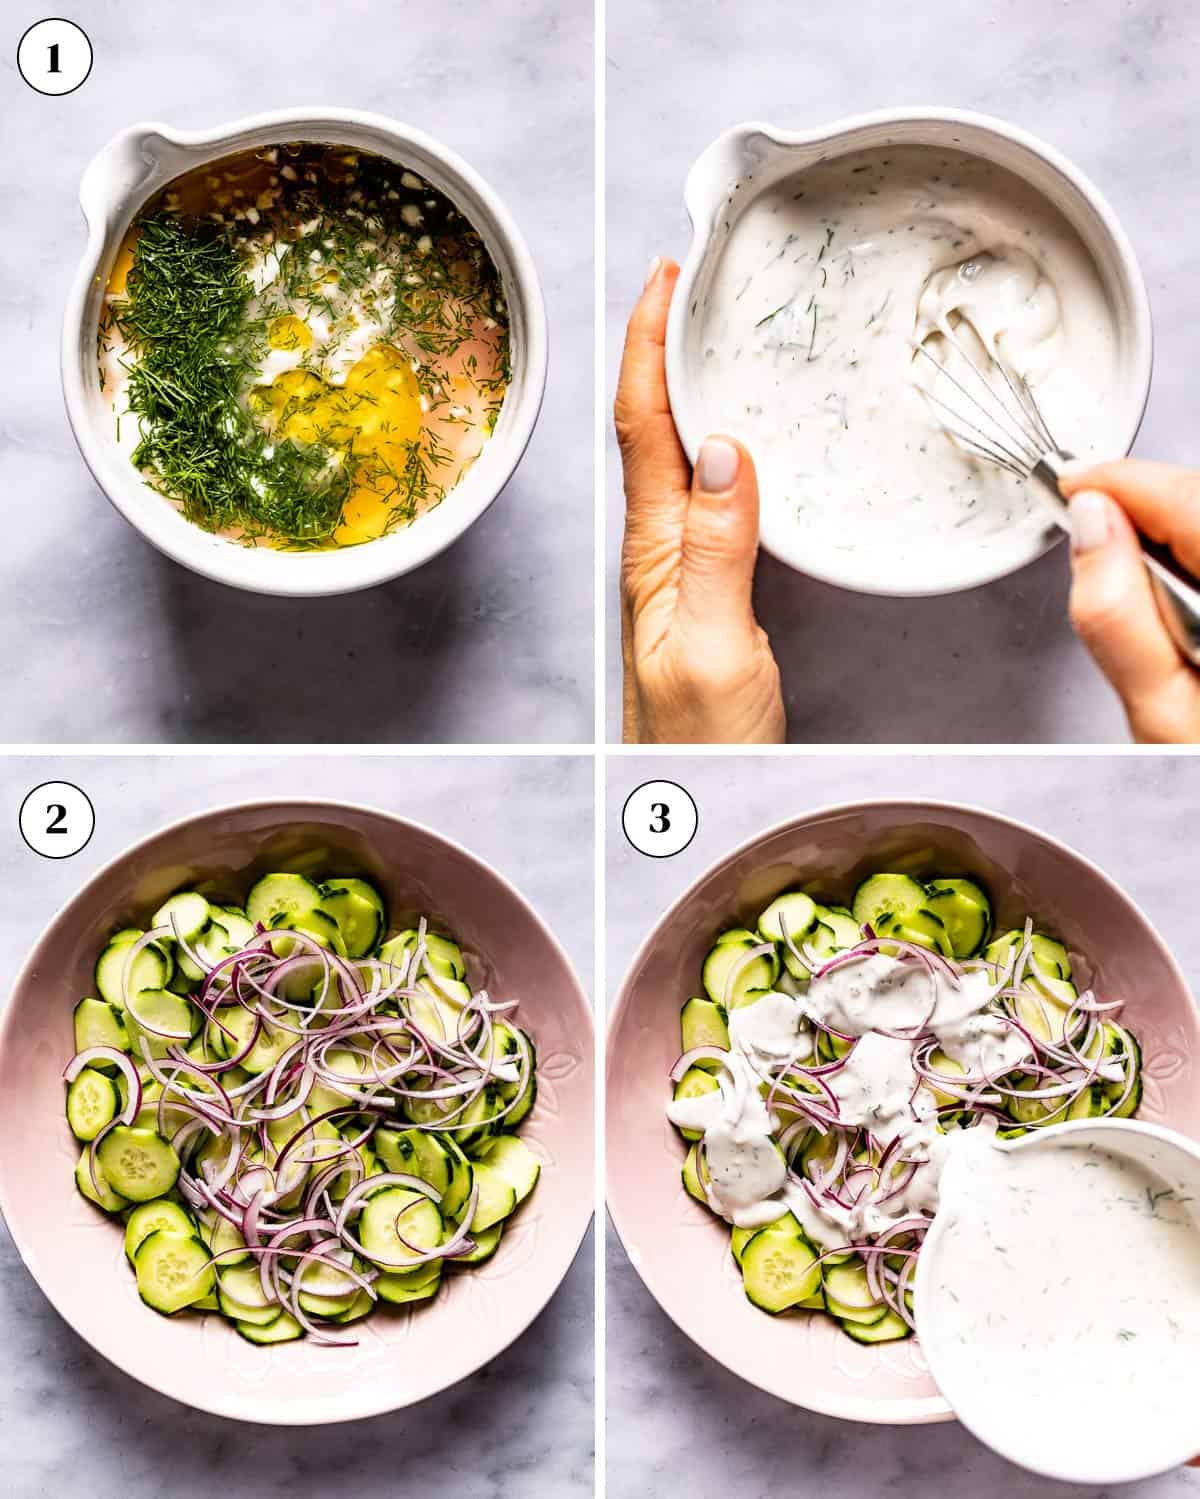 A collage of images showing how to make cucumber salad with Greek yogurt.